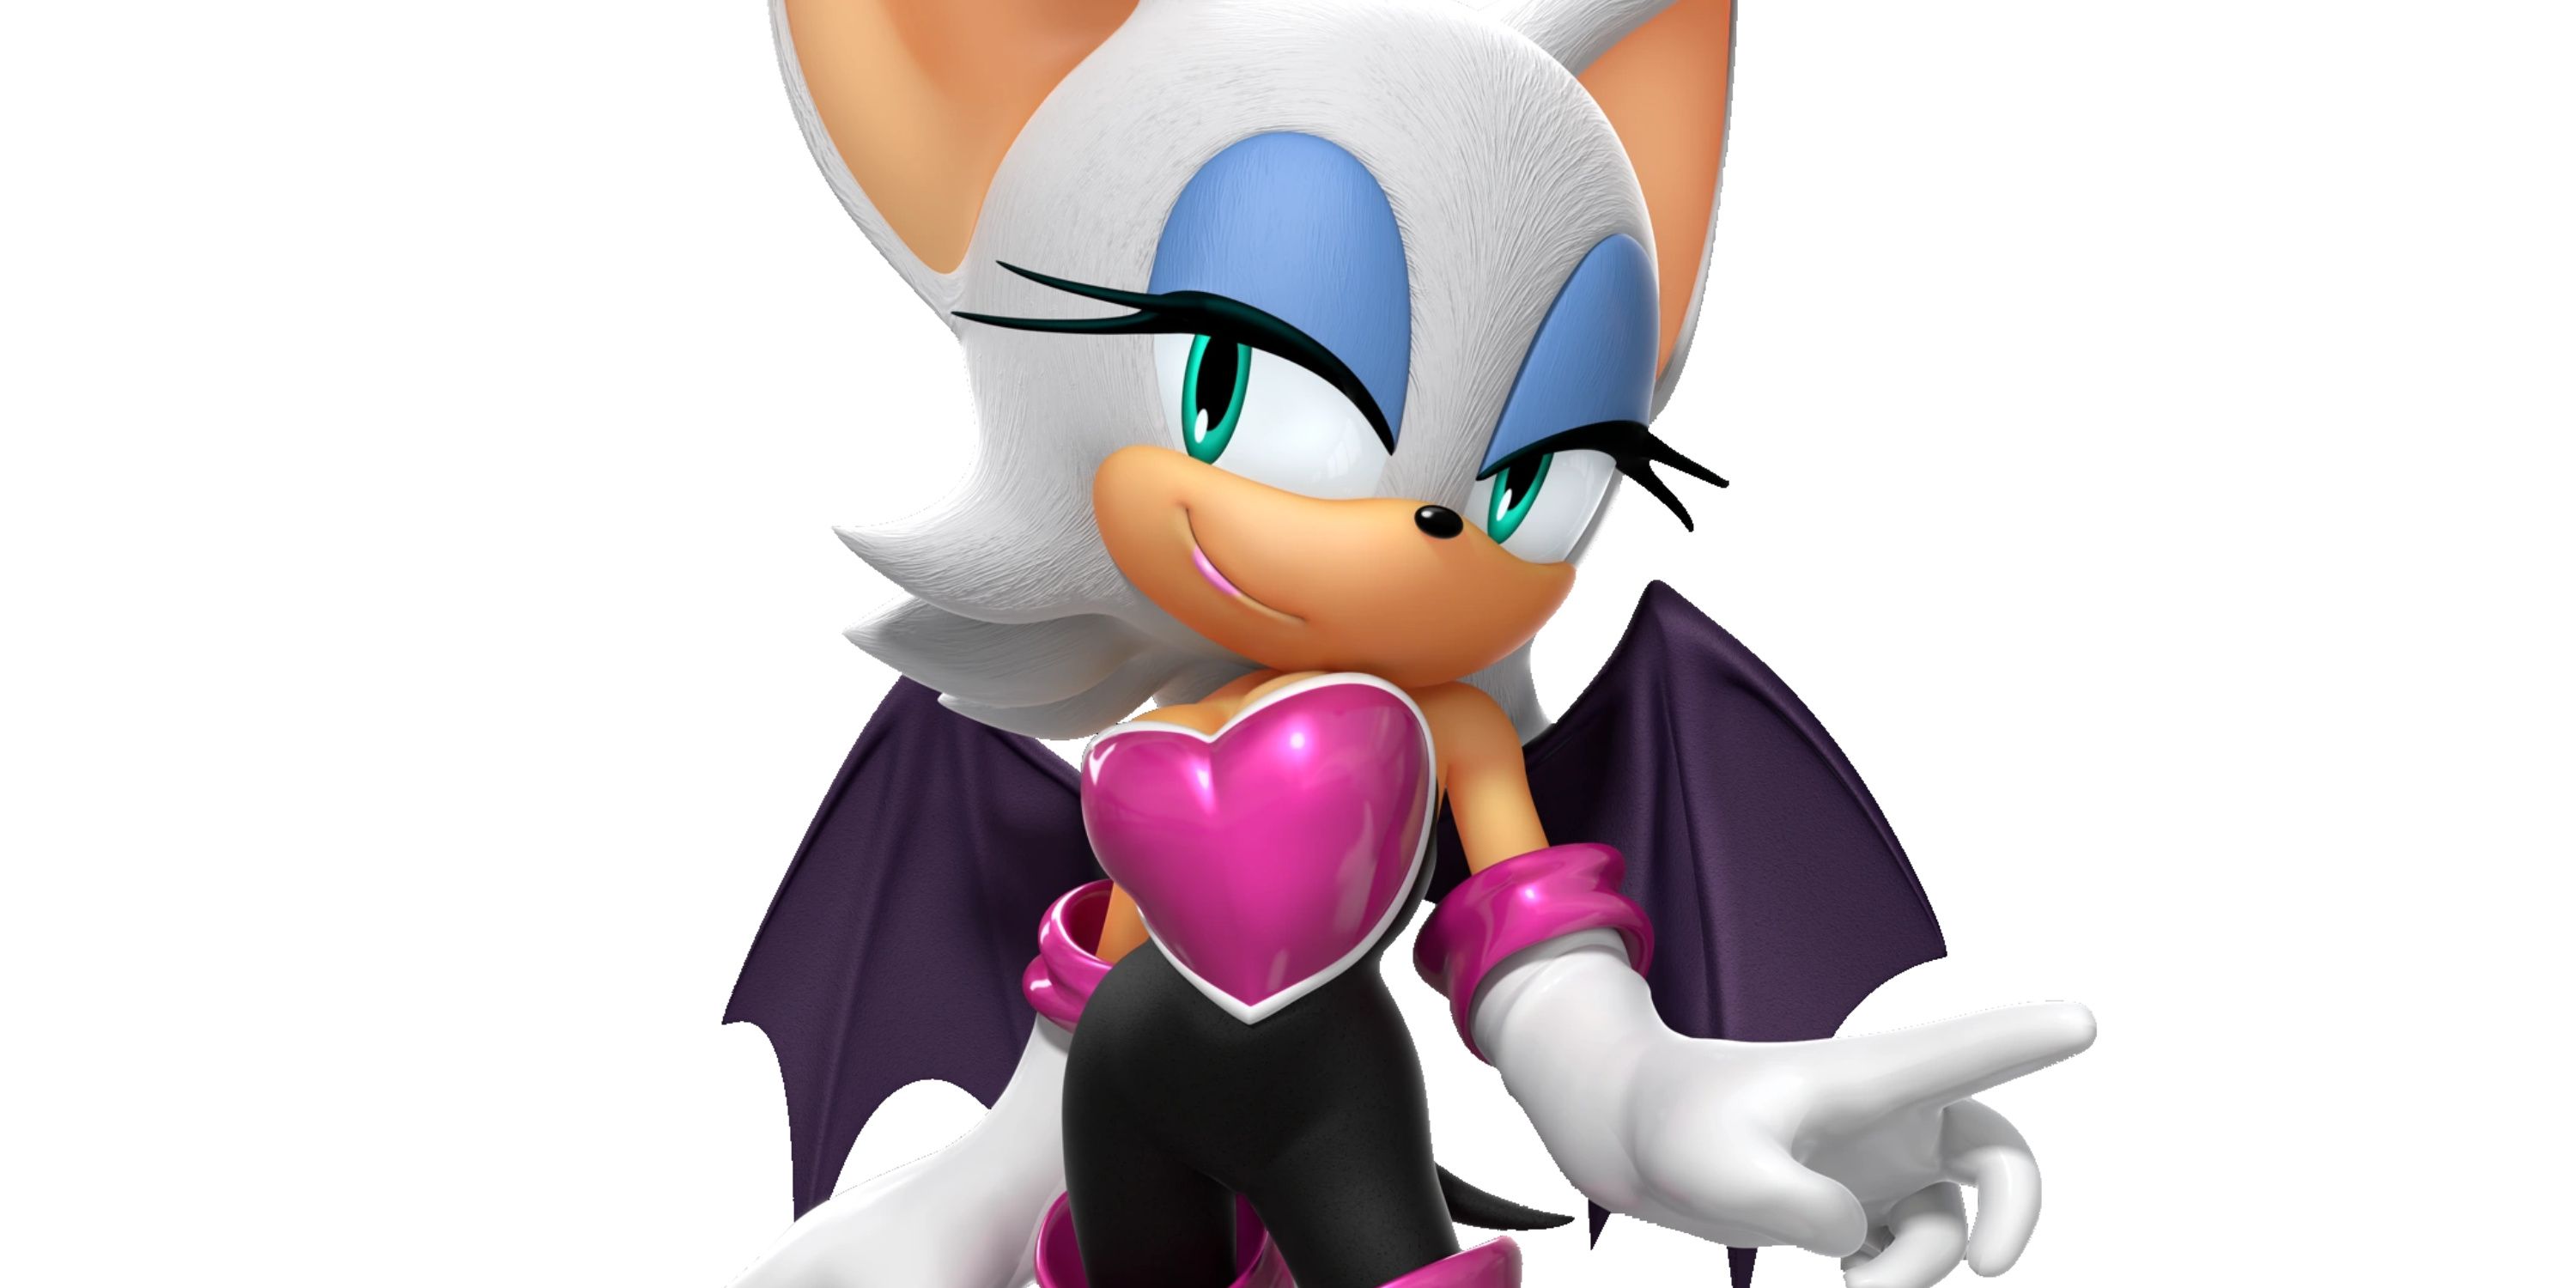 Rouge from Mario & Sonic at the Rio 2016 Olympic Games